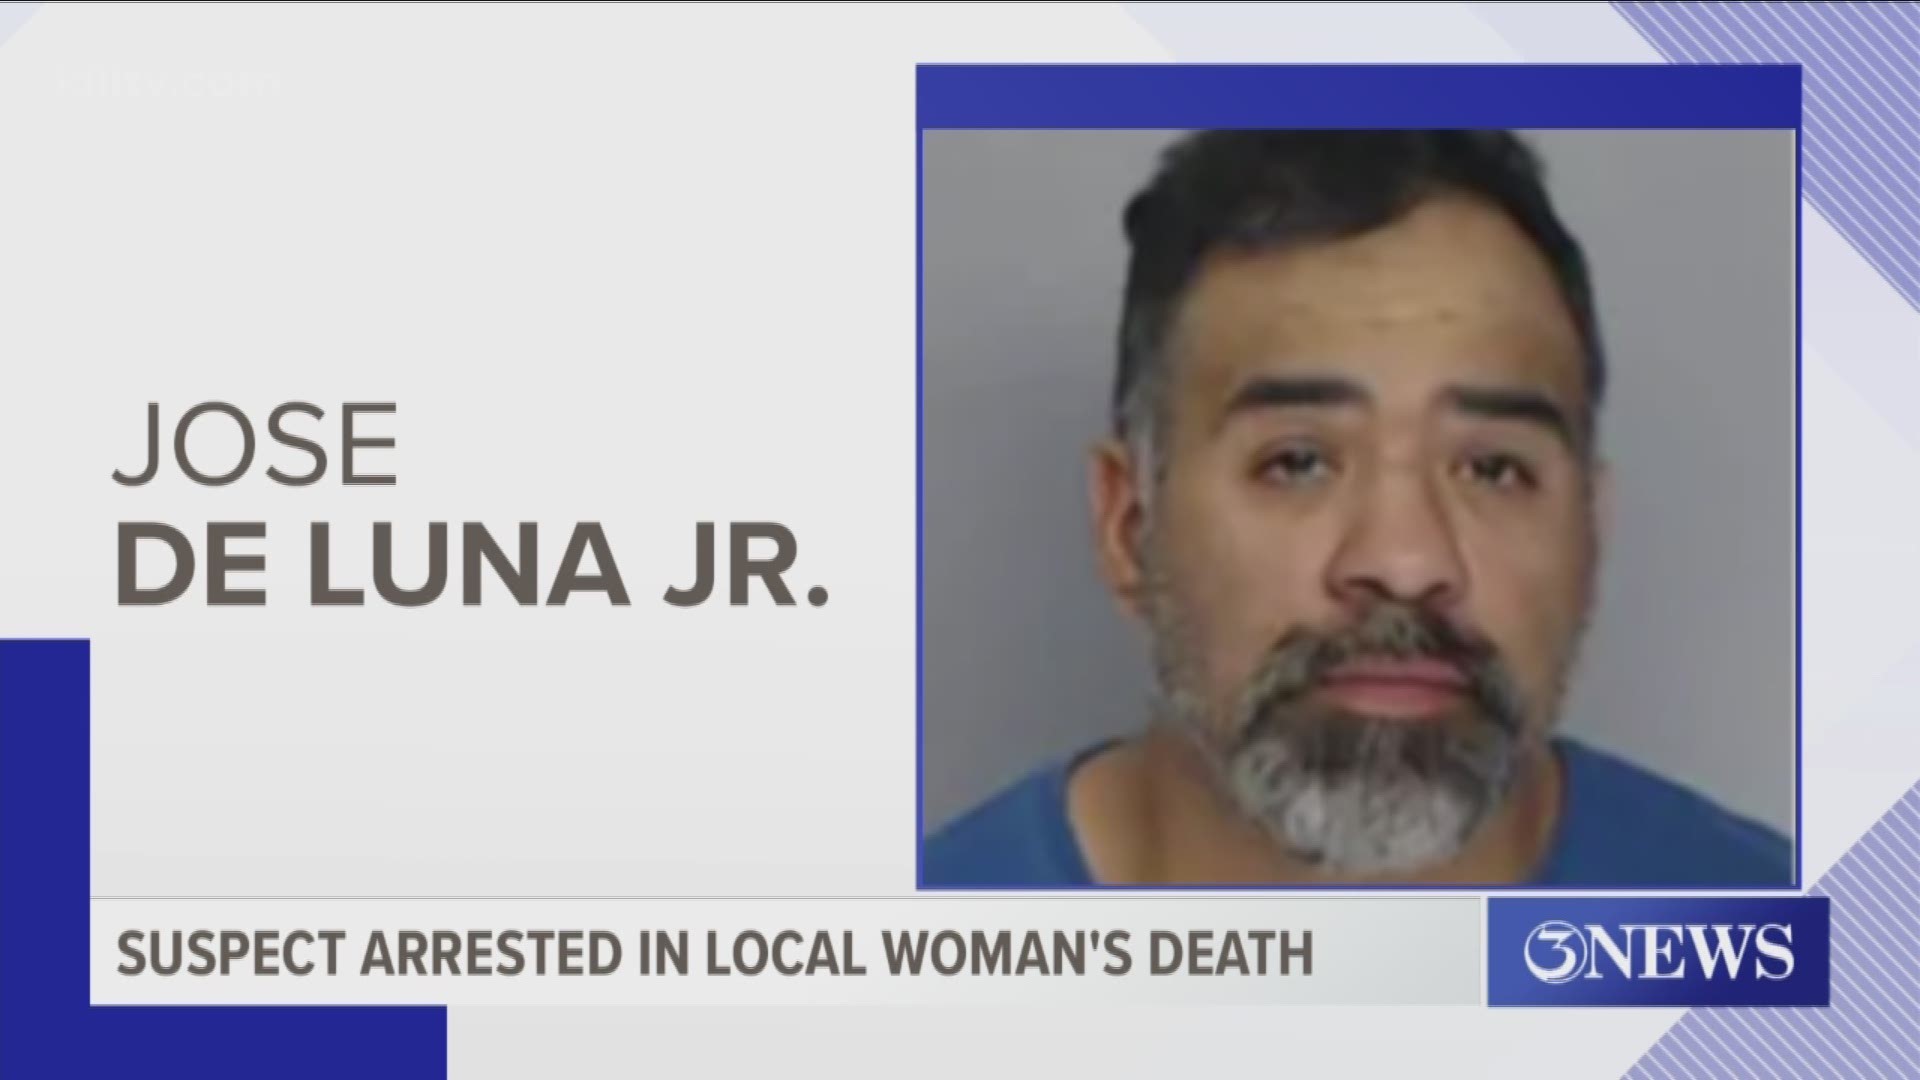 According to the Nueces County District Attorney's Office, 46-year-old Jose Guadalupe de Luna Jr. was wanted for murder.